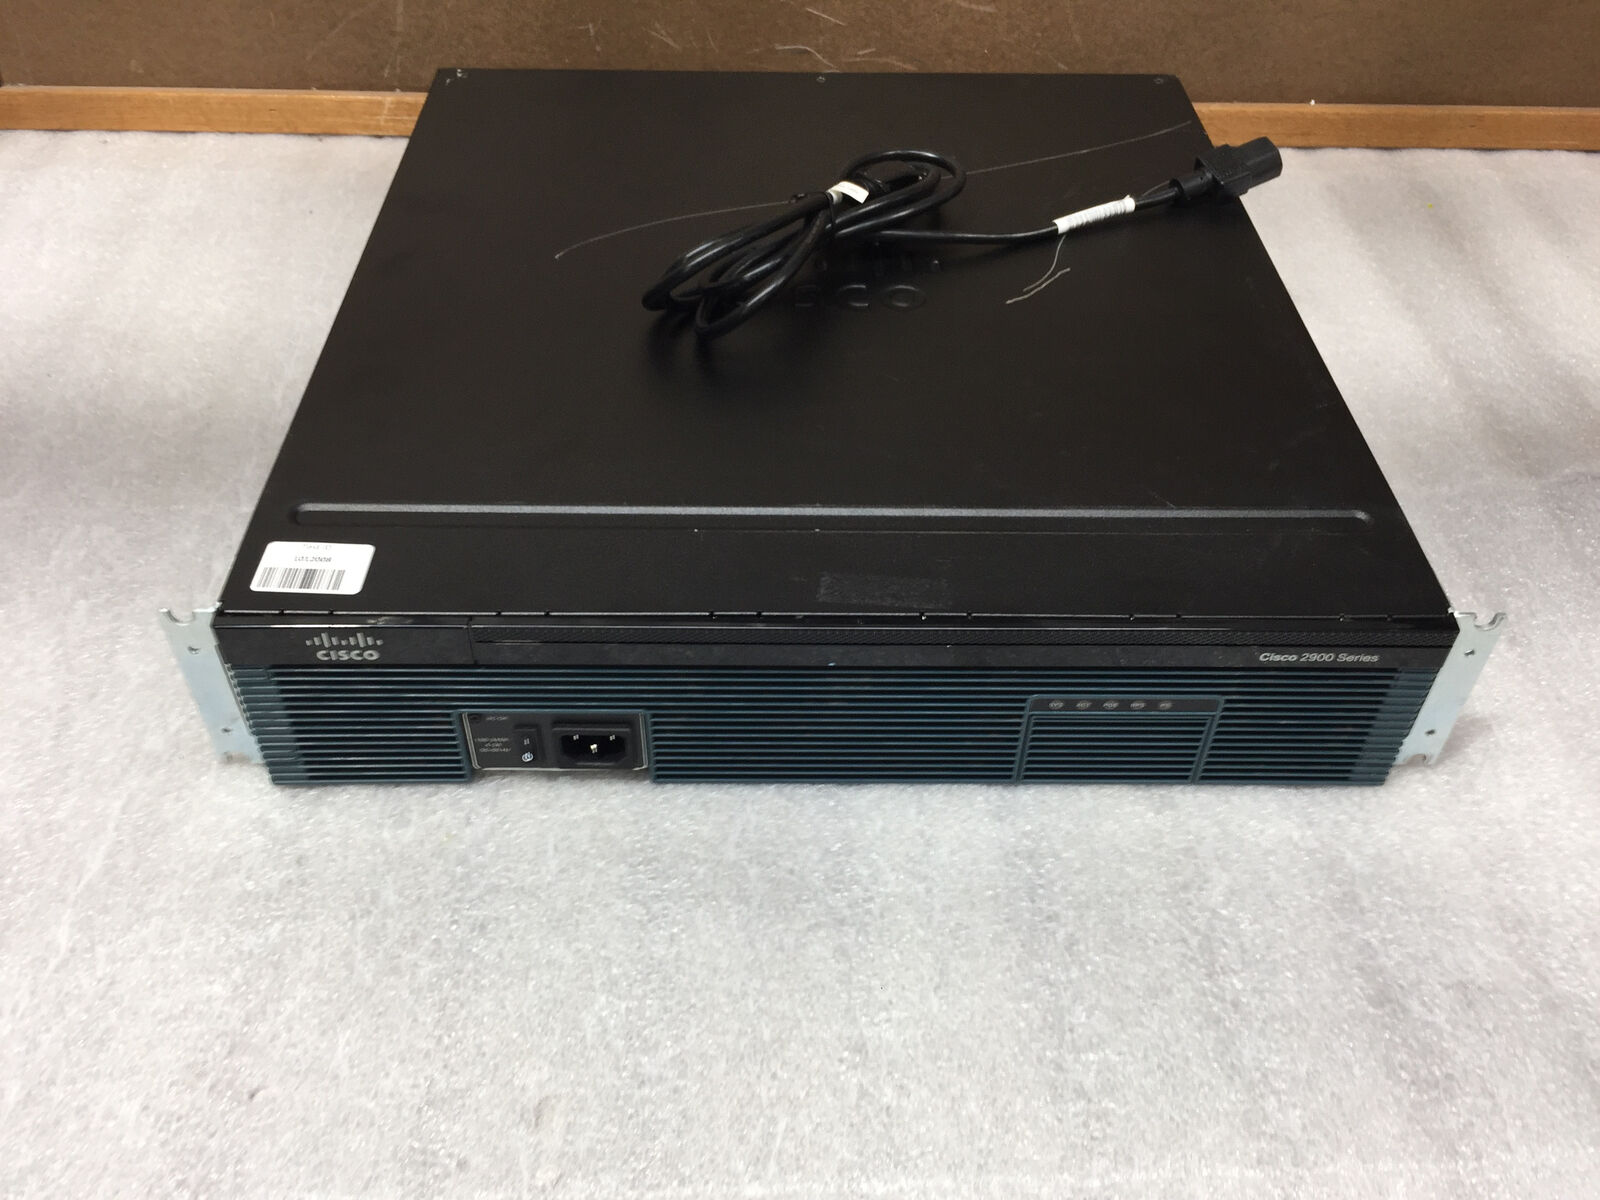 Cisco CISCO2921/K9 2900 Series Integrated Services Modular Router TESTED